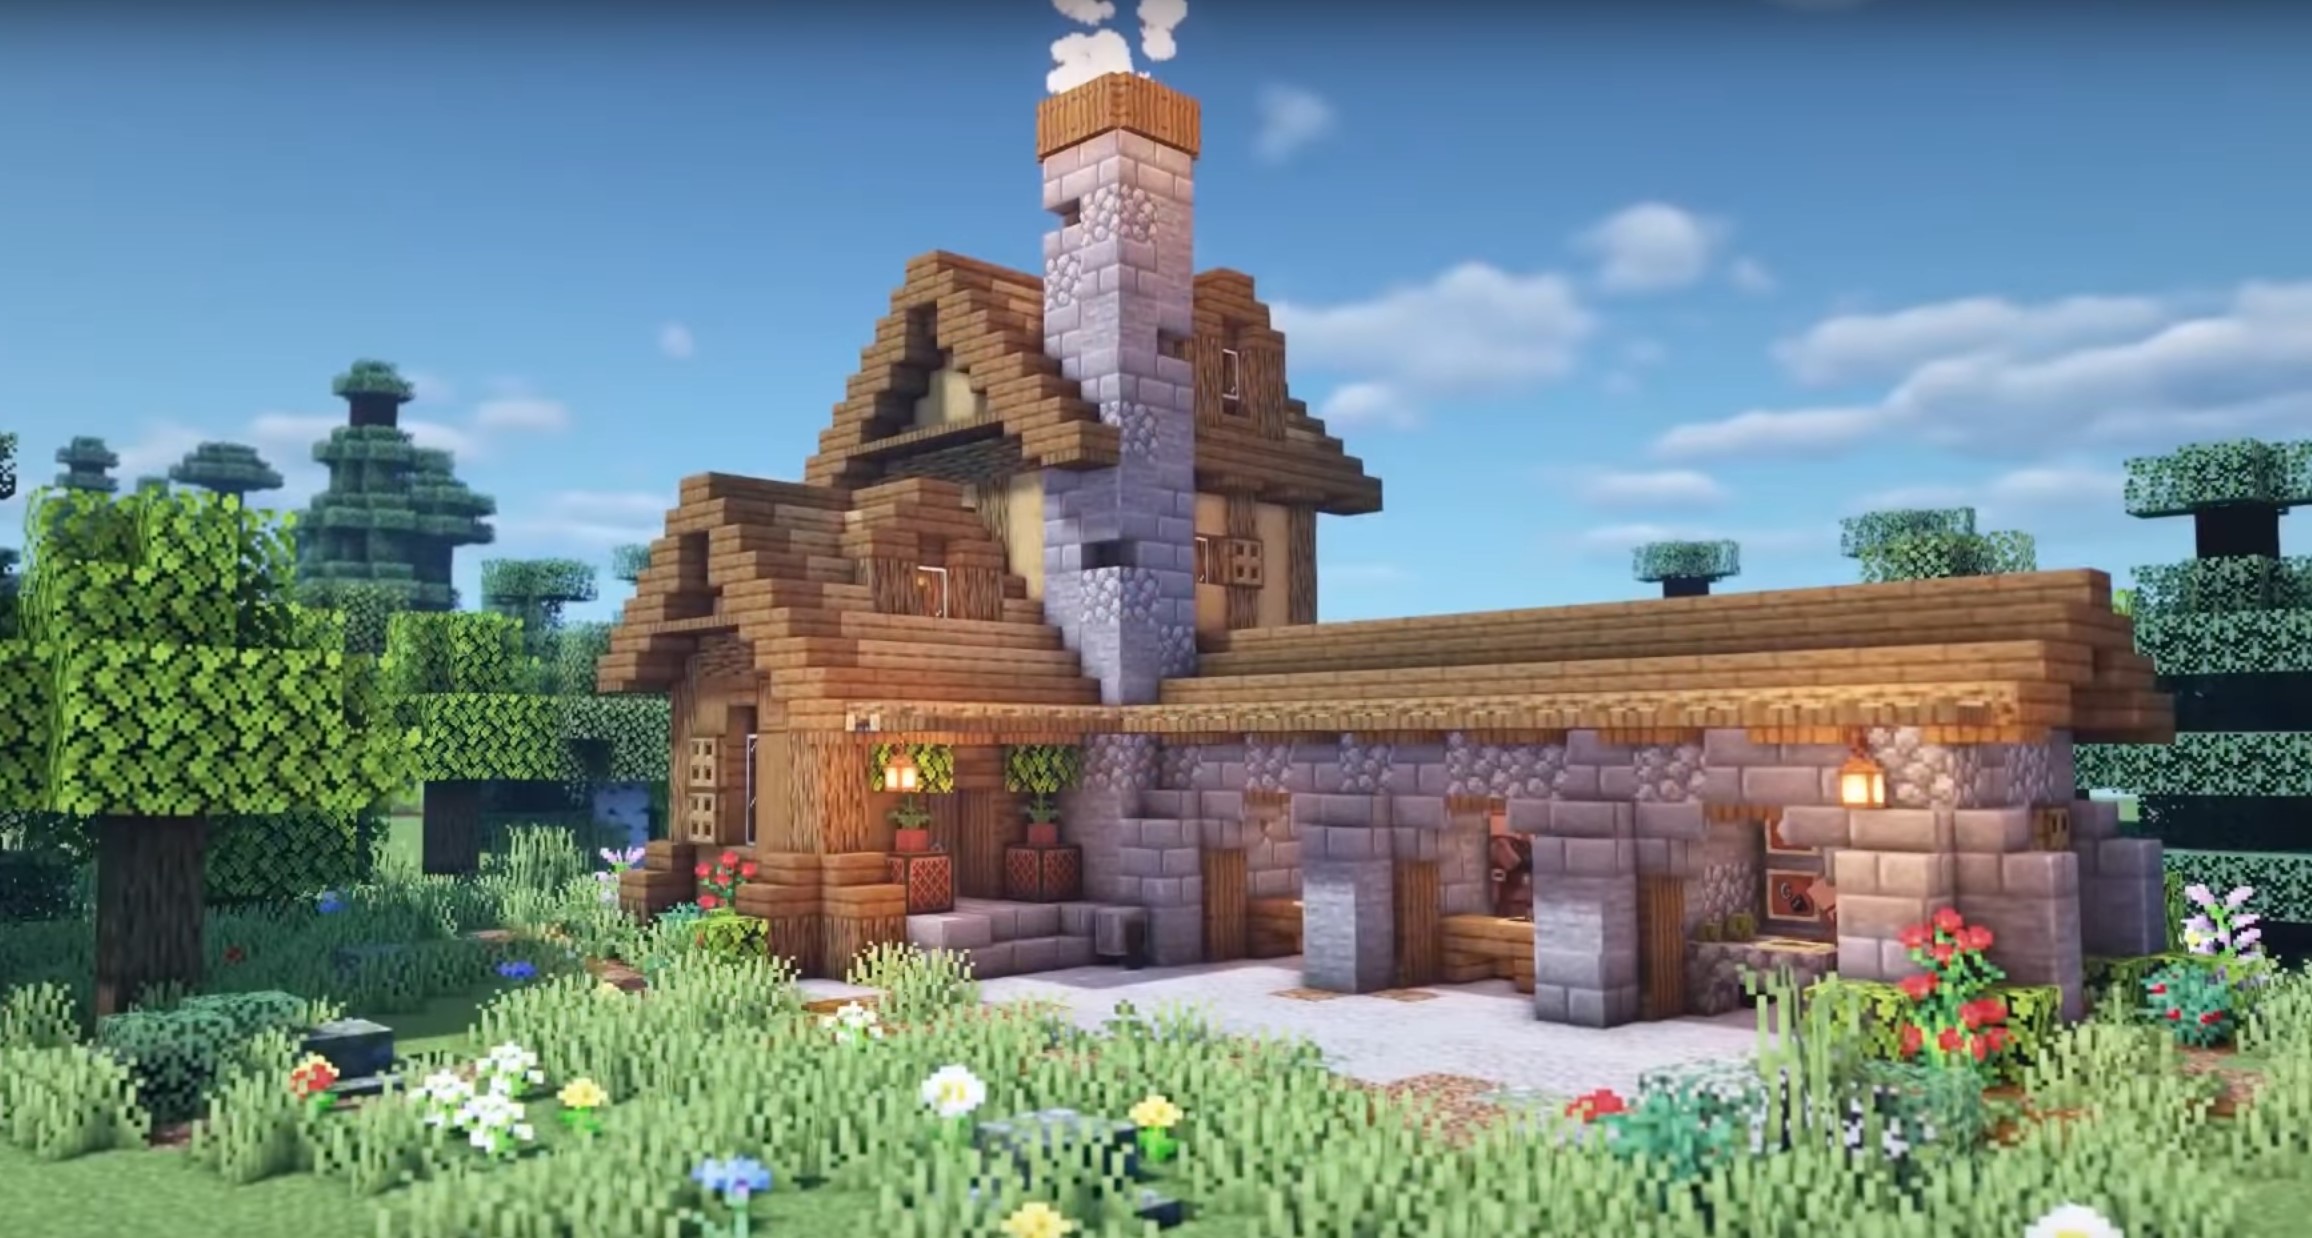 Stone Weaponsmiths House minecraft building idea